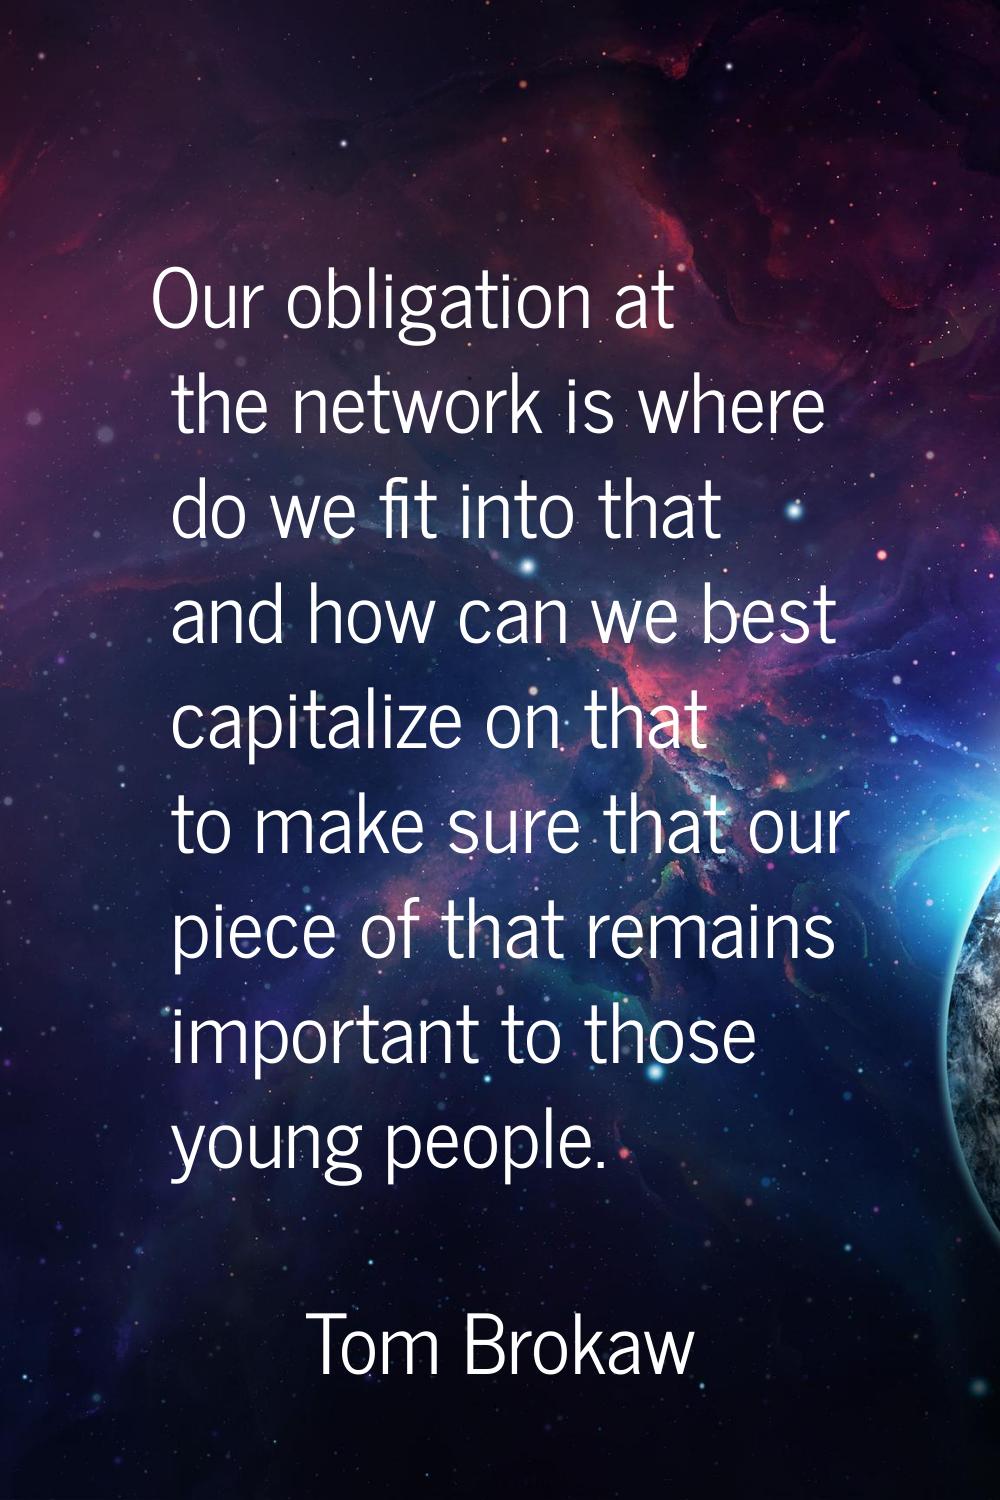 Our obligation at the network is where do we fit into that and how can we best capitalize on that t